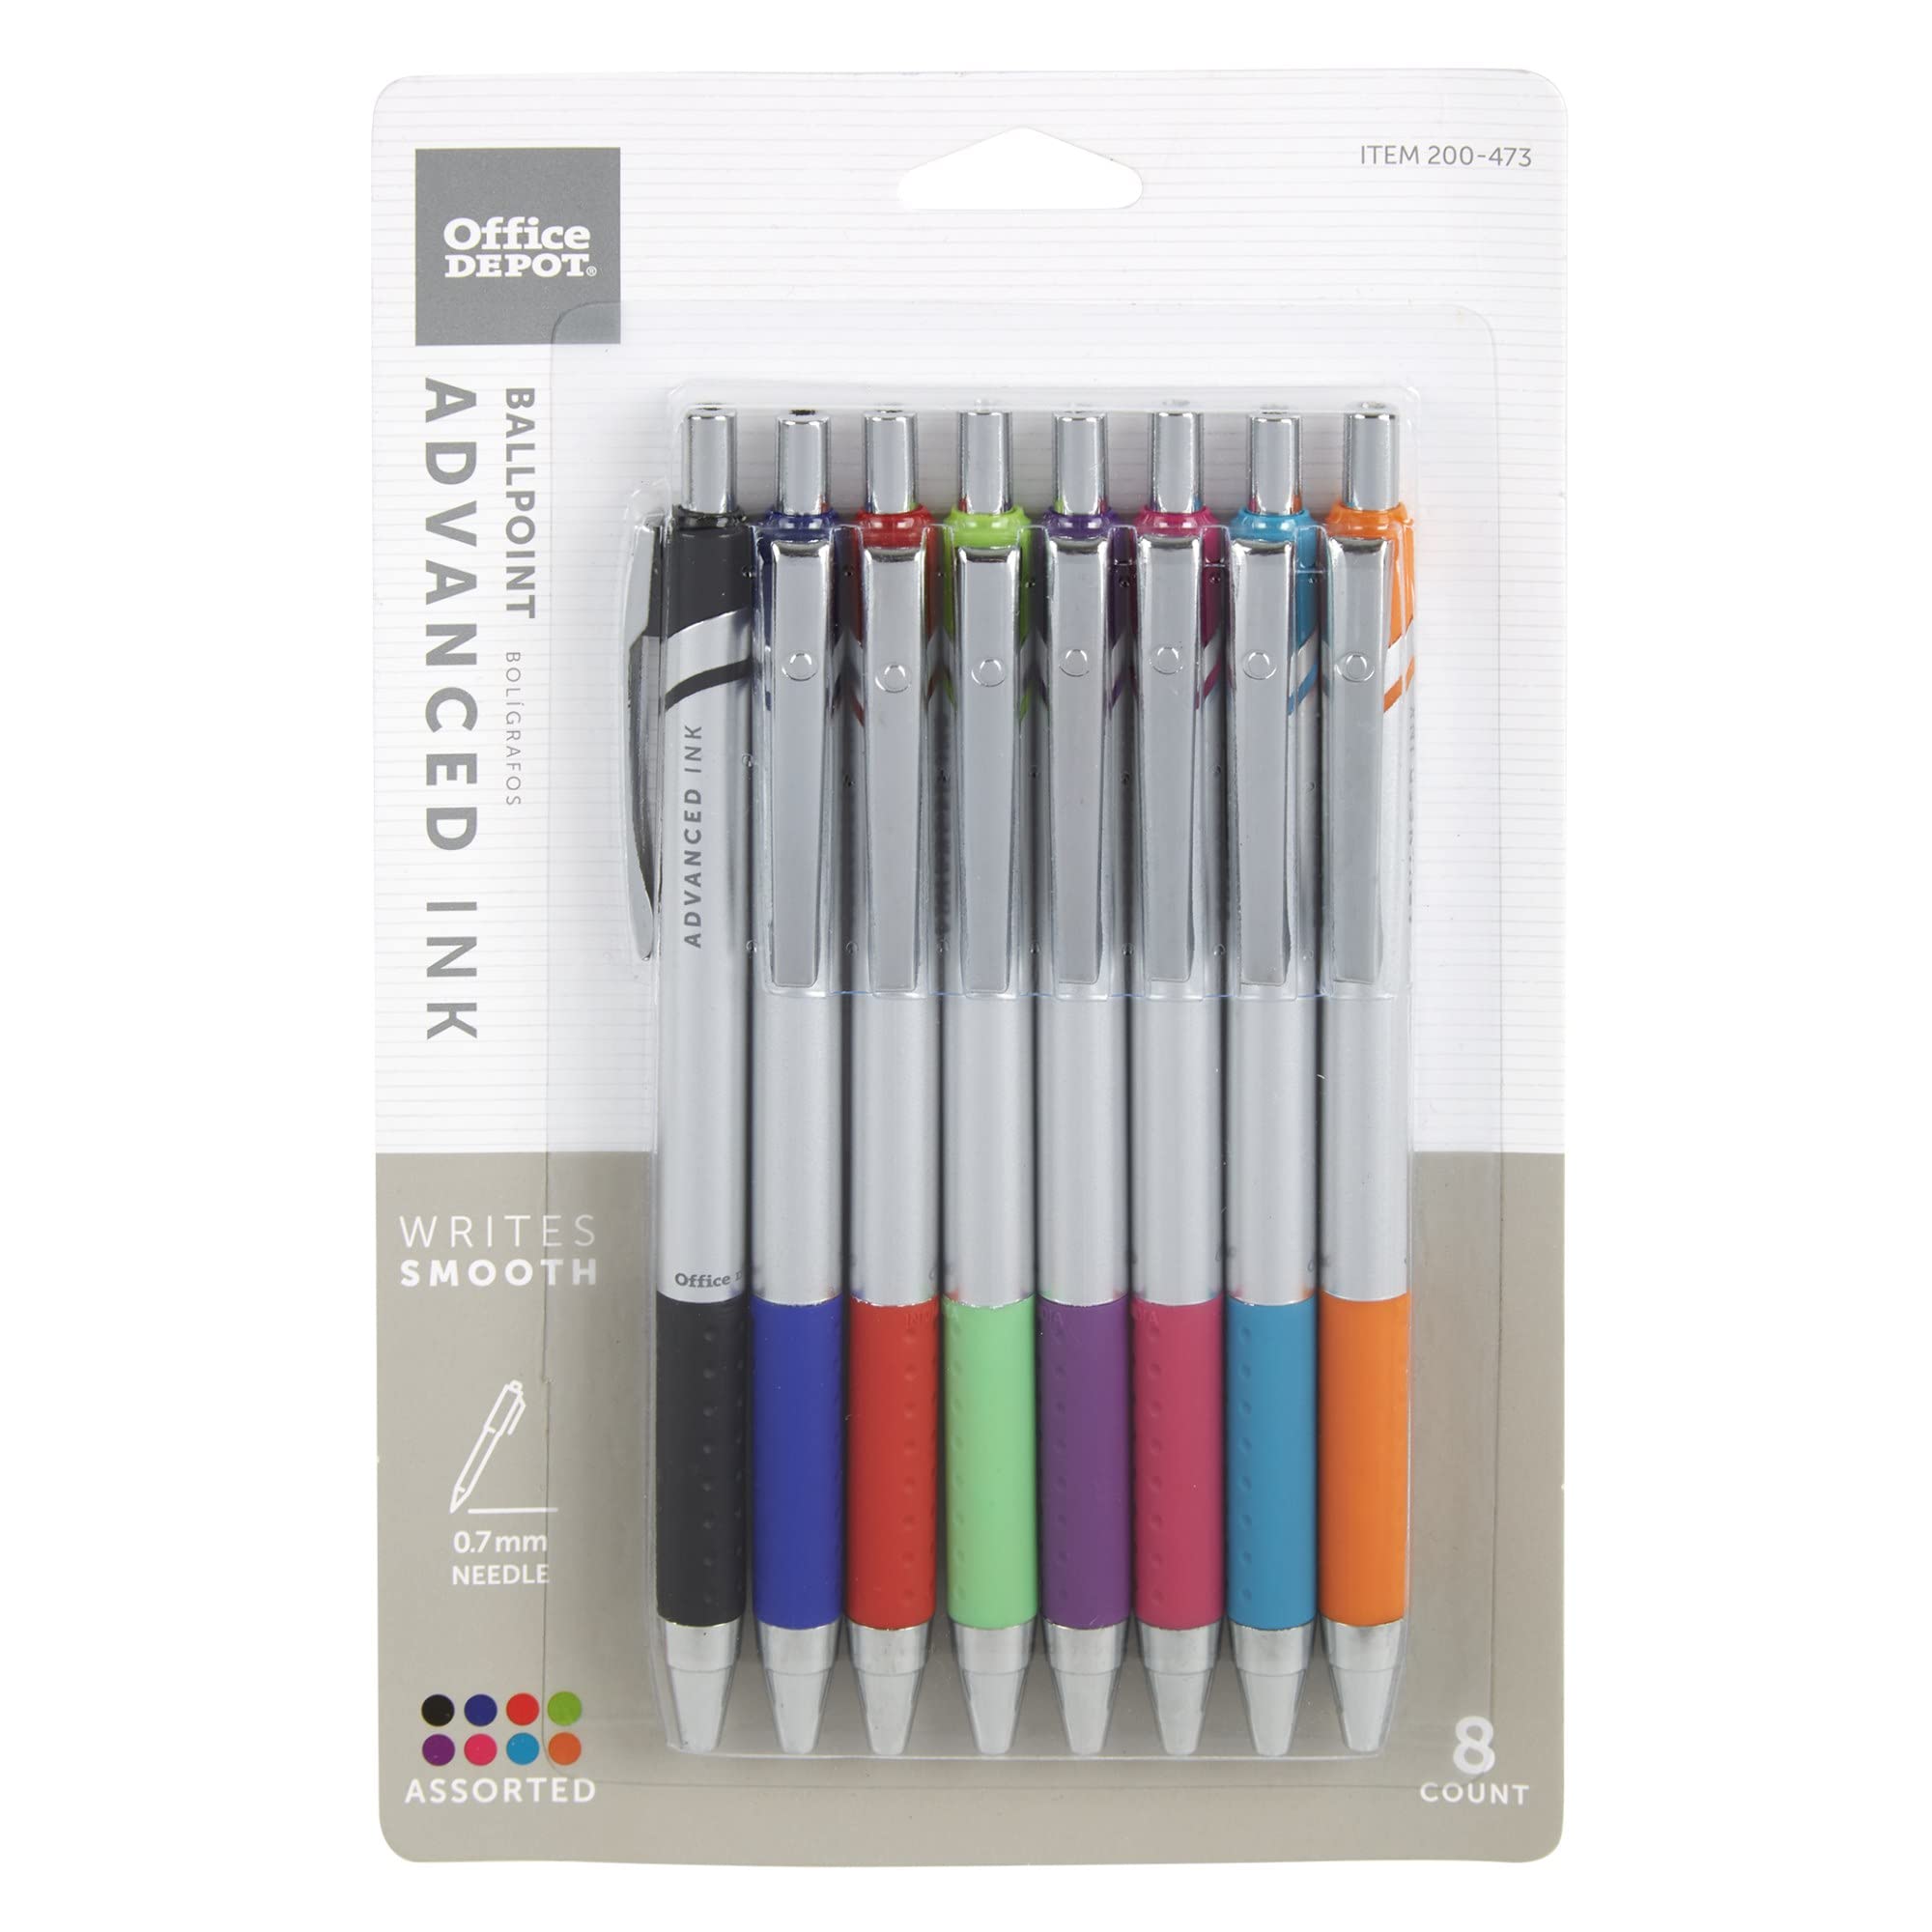 Mua Office Depot Advanced Ink Retractable Ballpoint Pens, Needle Point,   mm, Assorted Barrels, Assorted Ink Colors, Pack Of 8 trên Amazon Mỹ chính  hãng 2023 | Giaonhan247